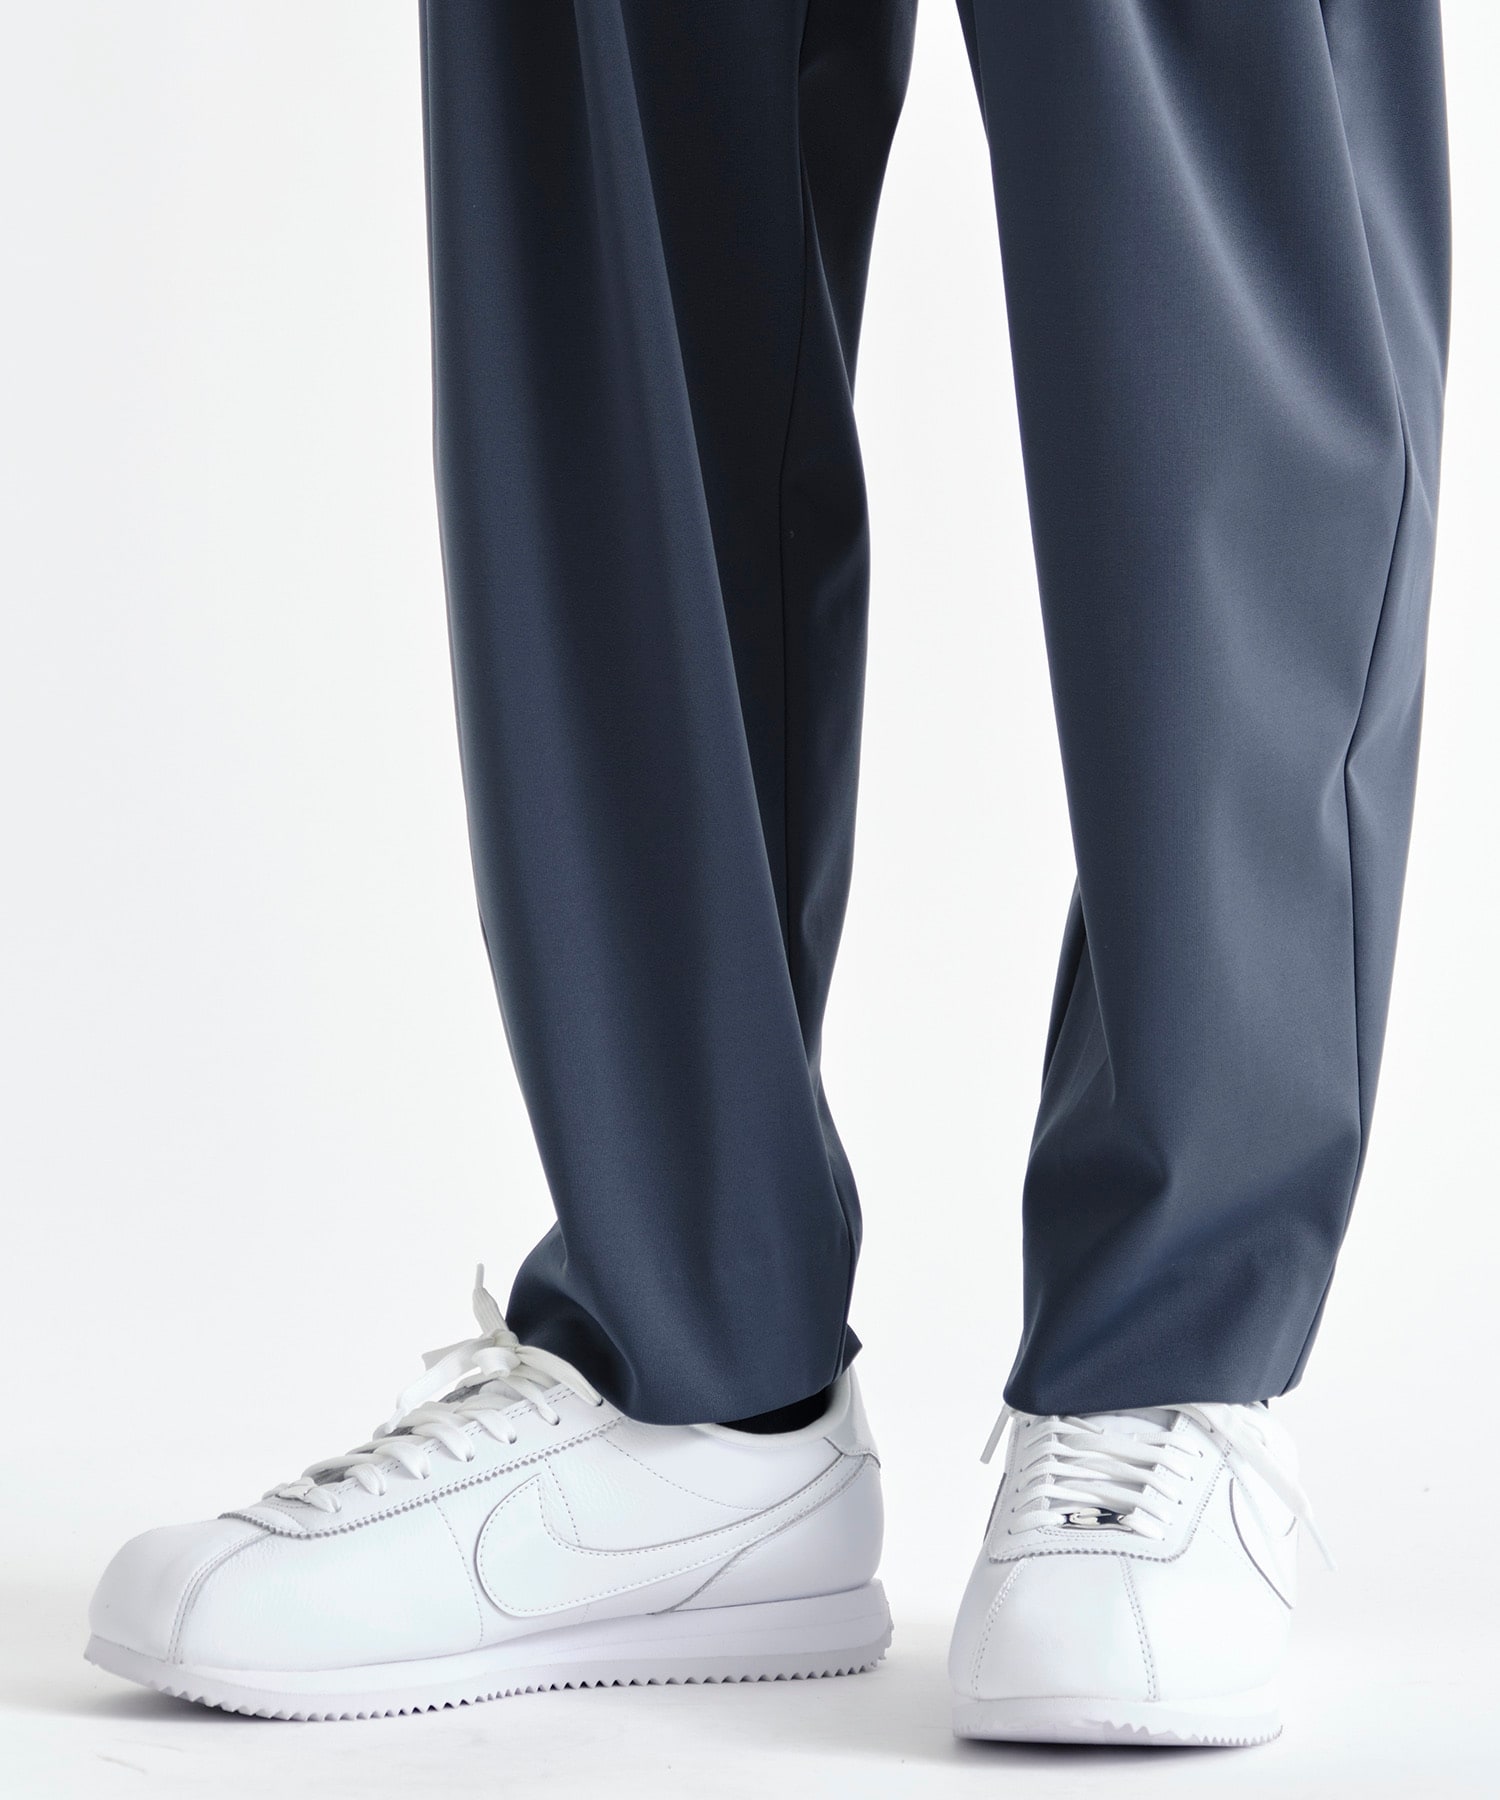 Washable High Function Jersey Wide Tapered Pants THE TOKYO